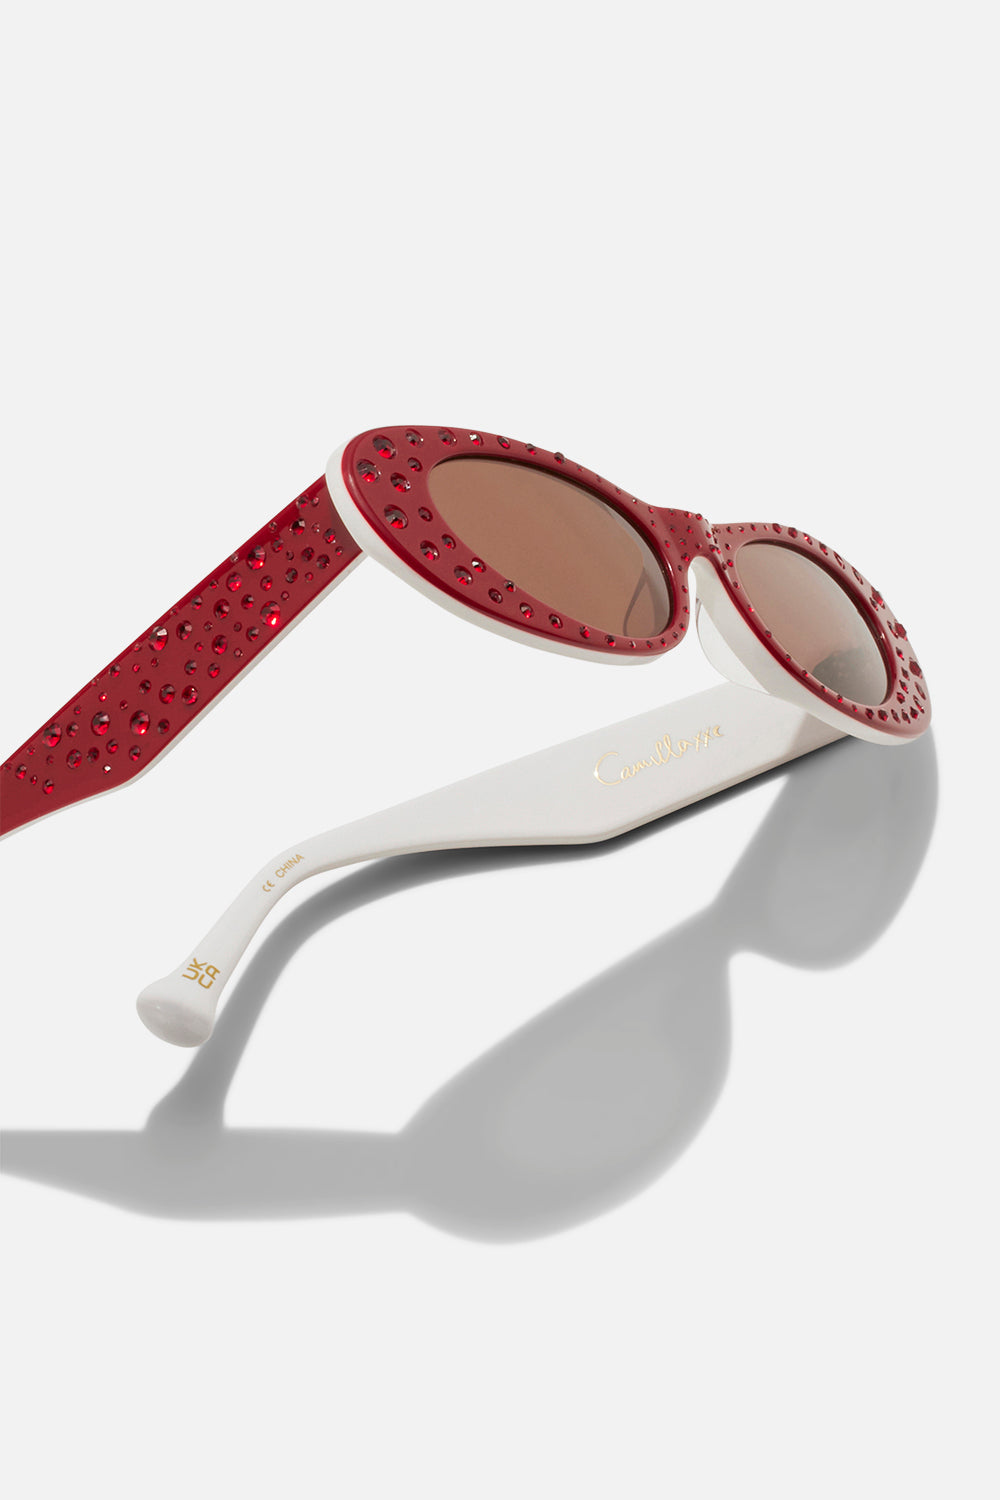 CHAMPAGNE & CAVIAR SUNGLASSES RED CRYSTAL